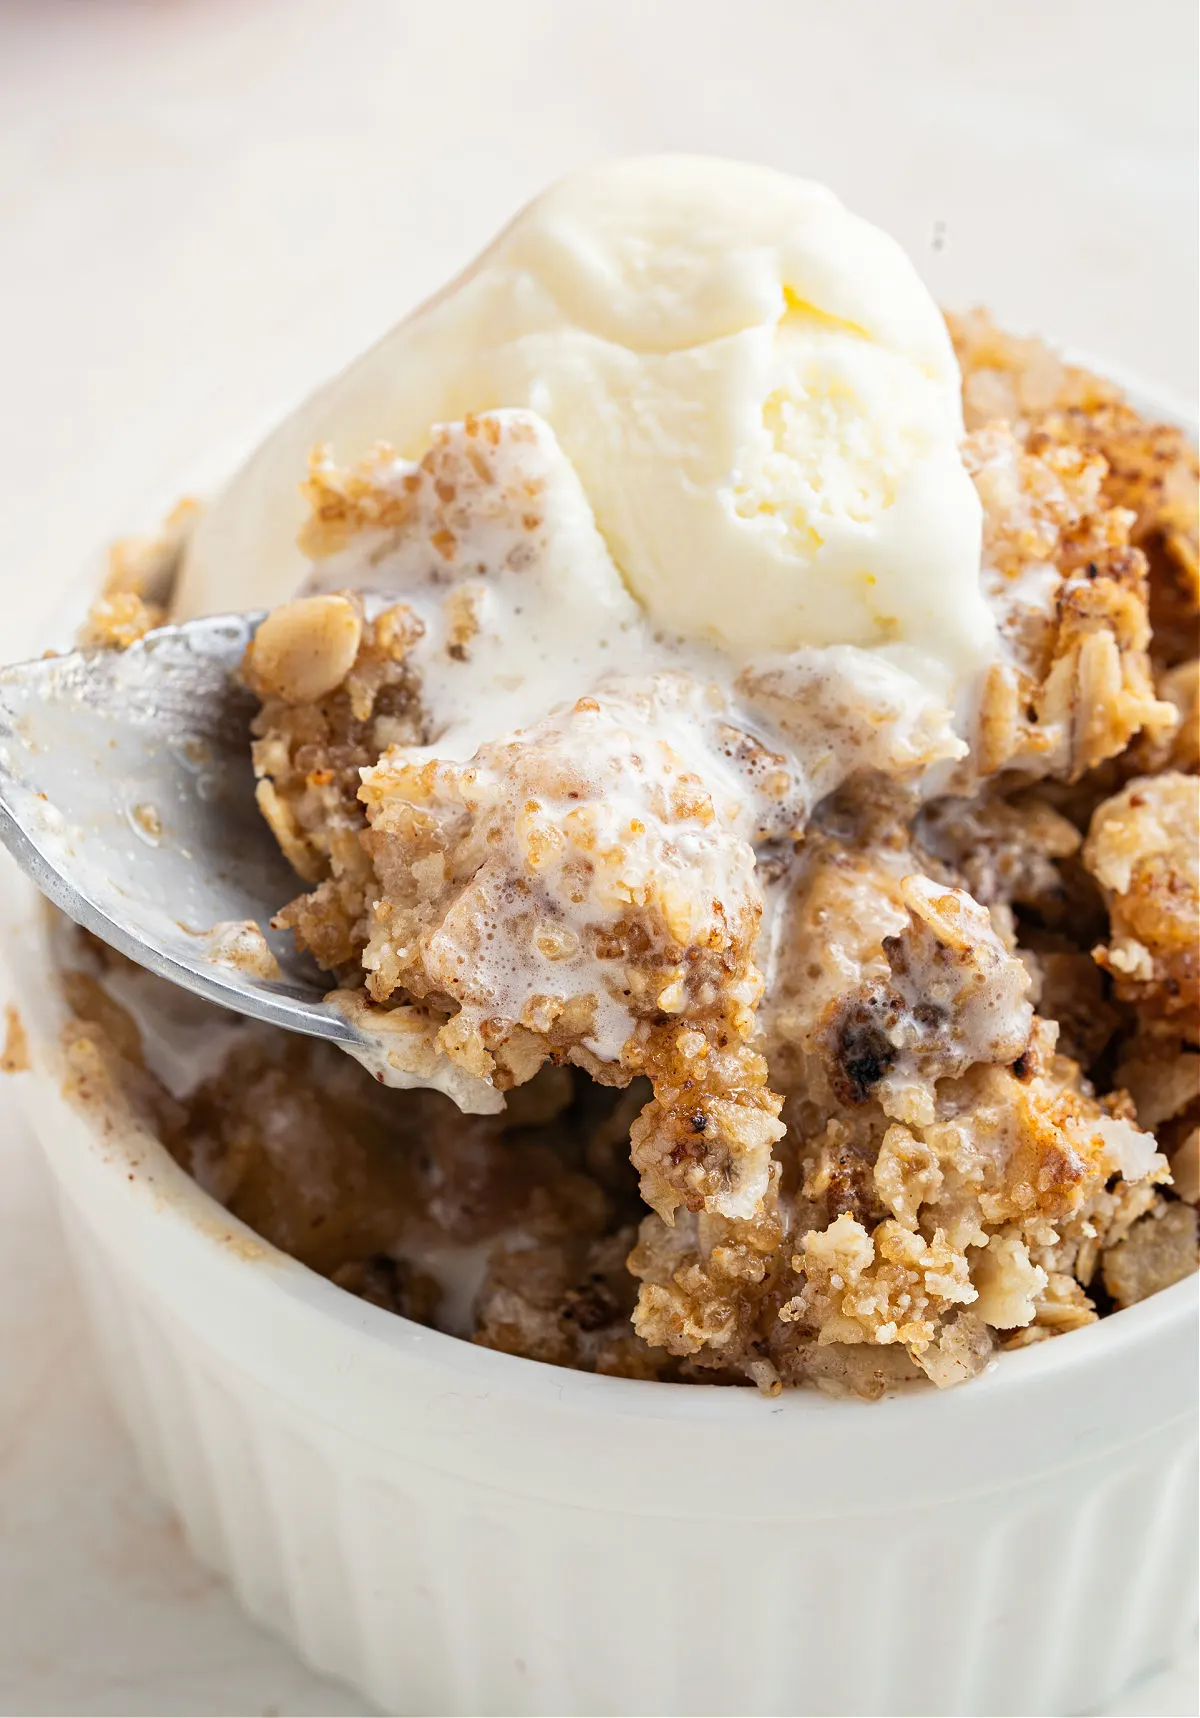 Apple crisp served with vanilla ice cream in a white bowl.